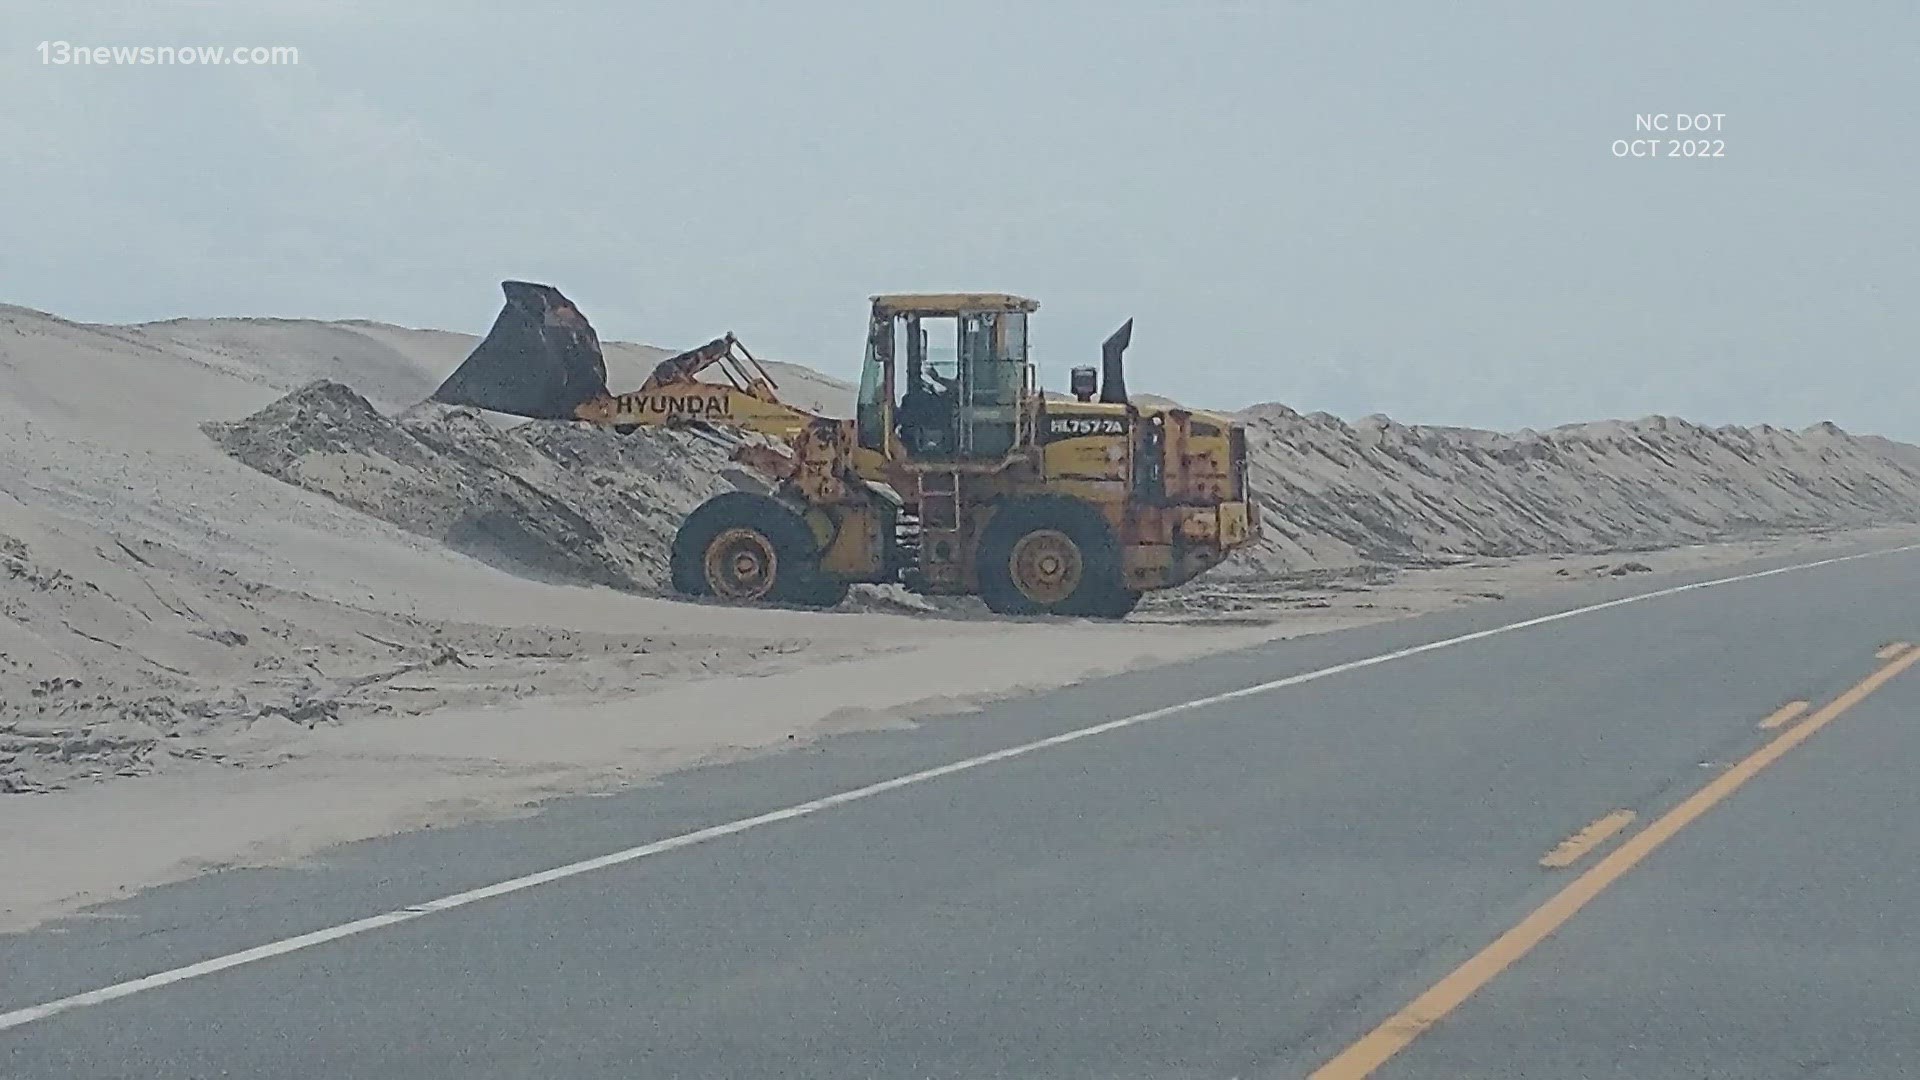 The work will help prevent overwash on the highway as Hurricane Franklin moves hundreds of miles off the coast and Tropical Storm Idalia moves over the area.